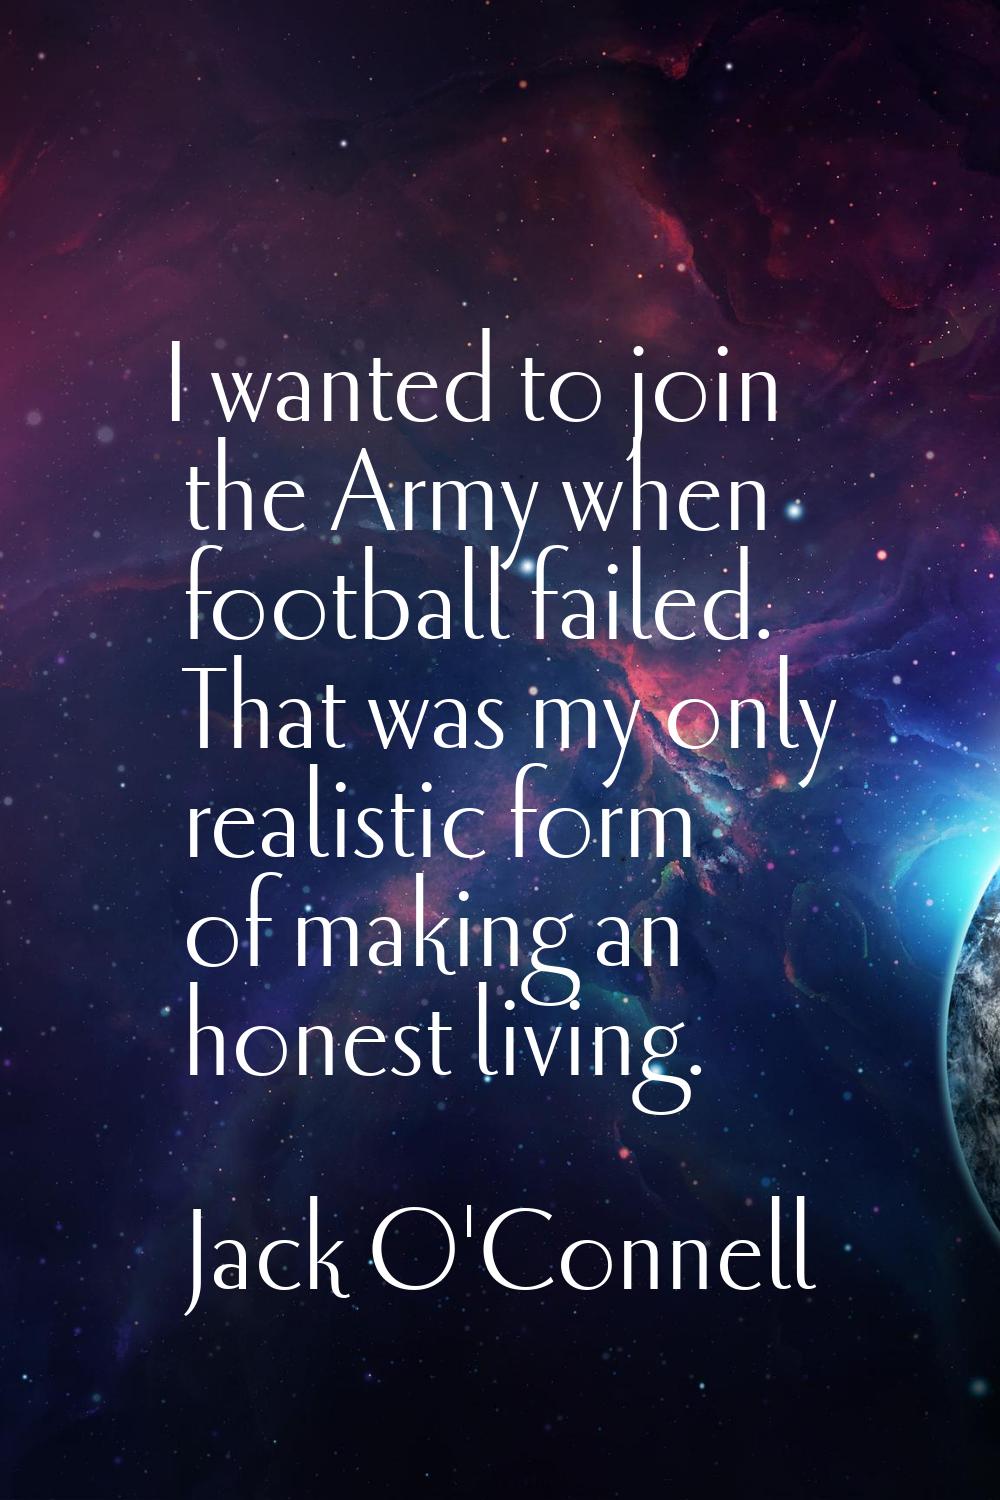 I wanted to join the Army when football failed. That was my only realistic form of making an honest